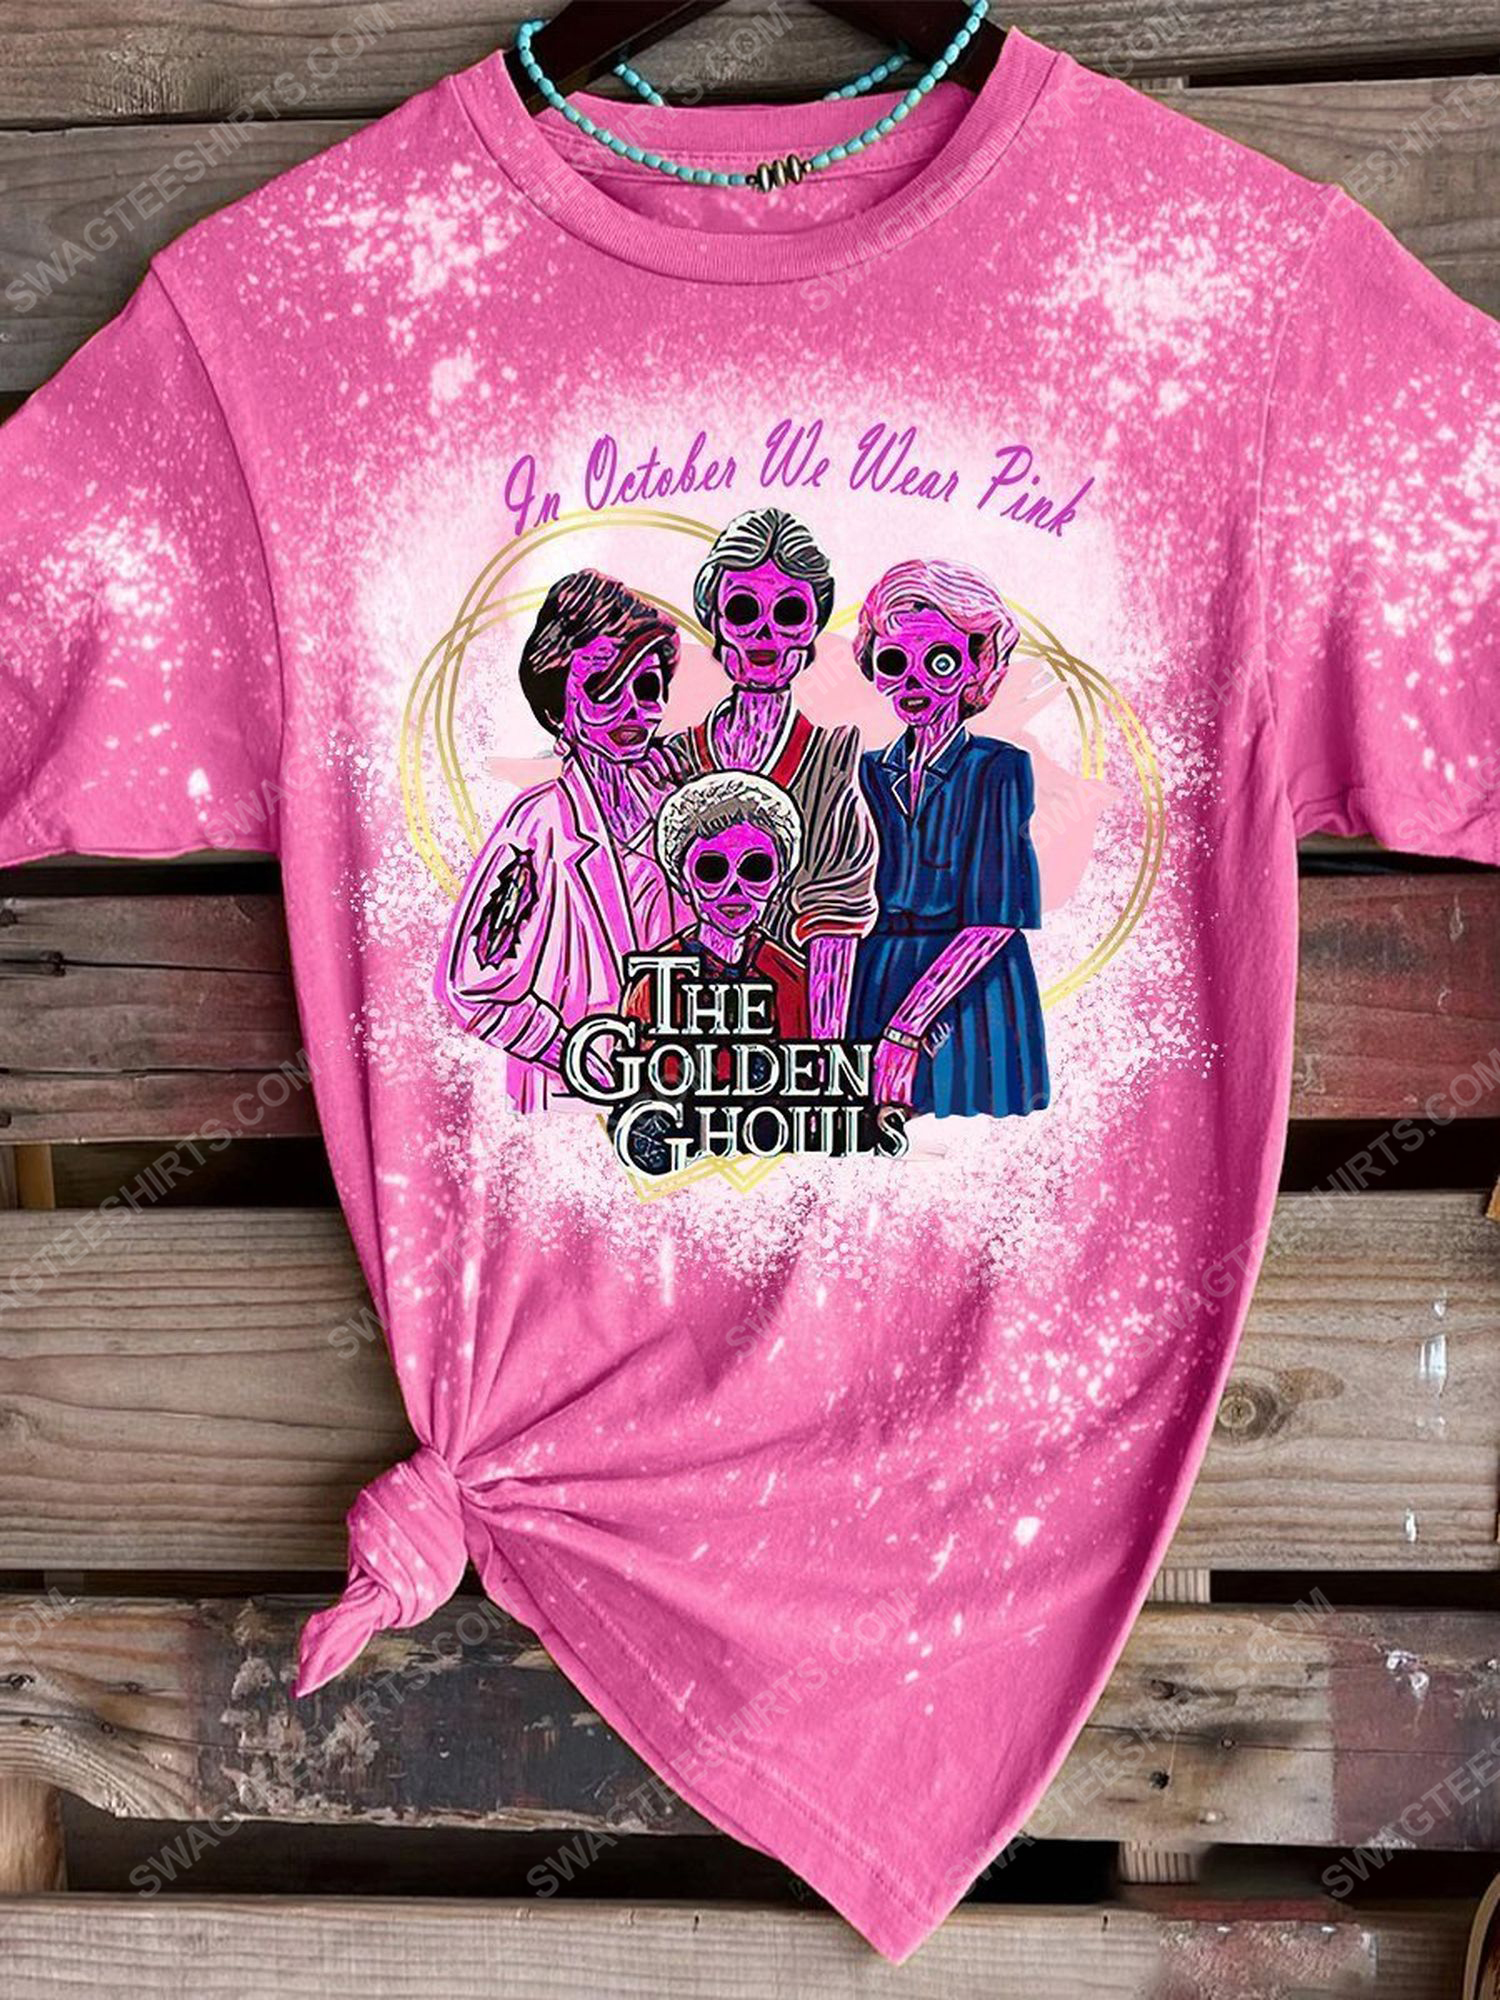 Breast cancer in october we wear pink the golden girls bleached shirt 1 - Copy (2)